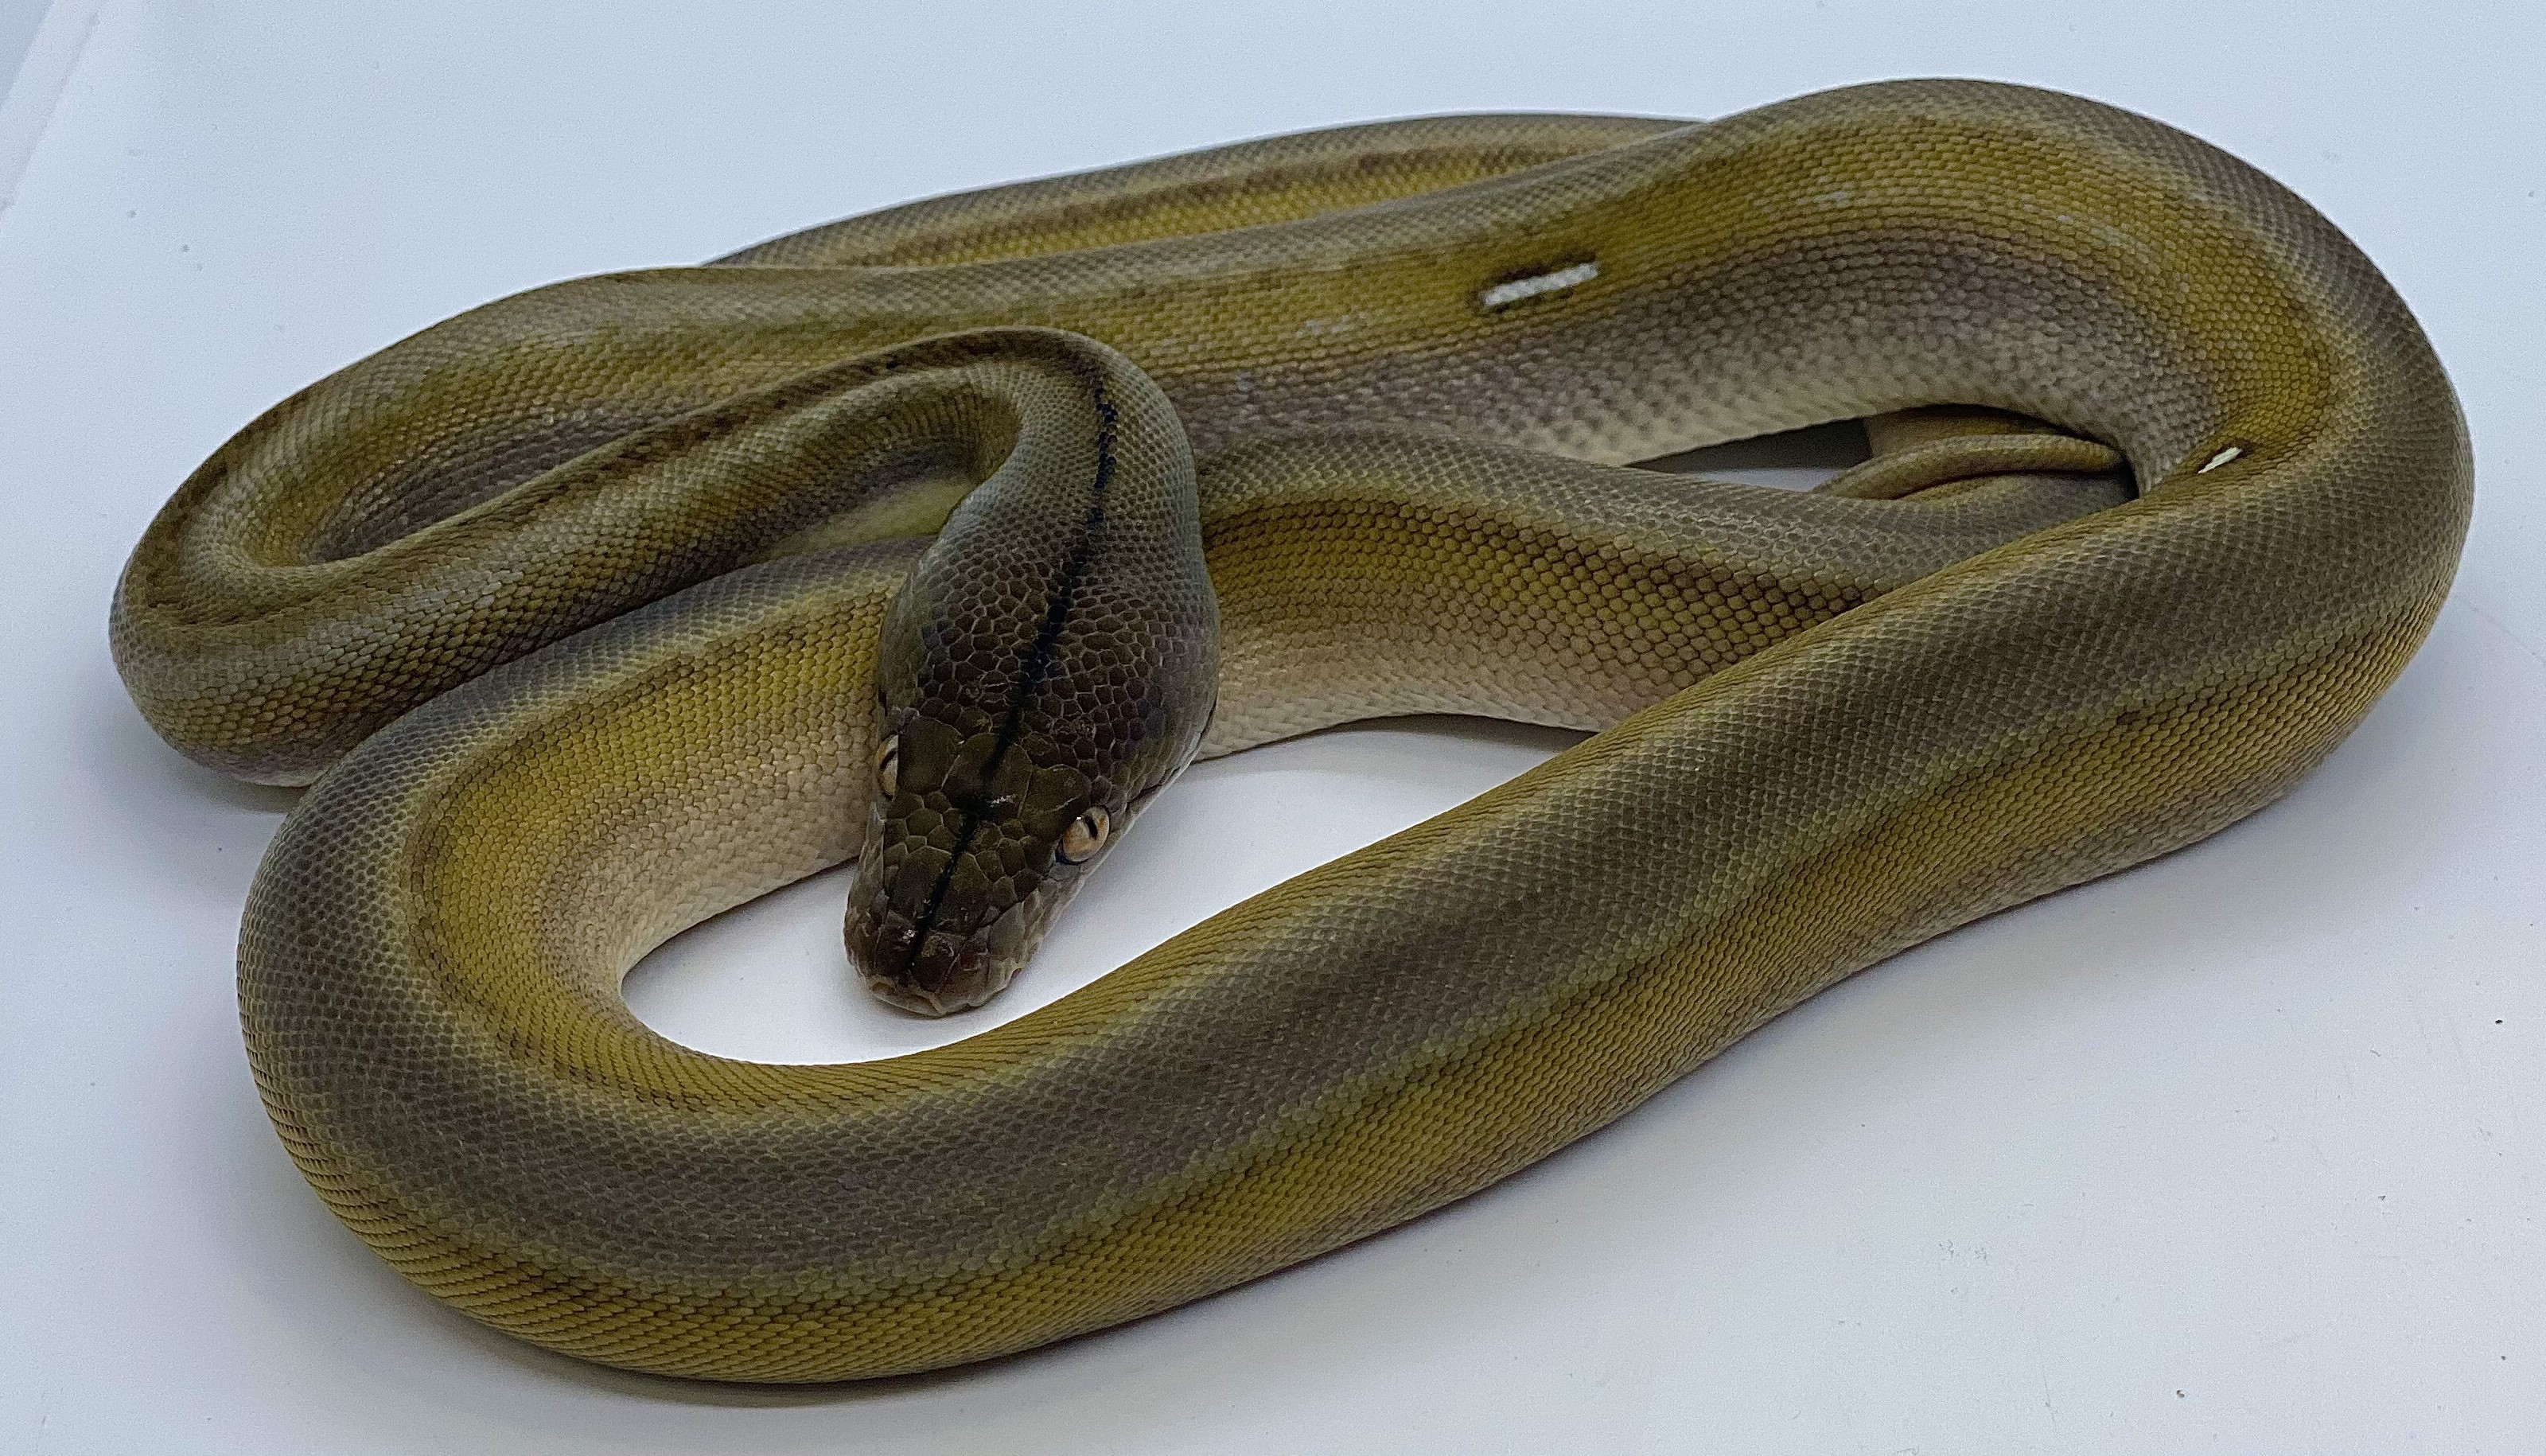 Titanium Reticulated Python by Prehistoric Pets